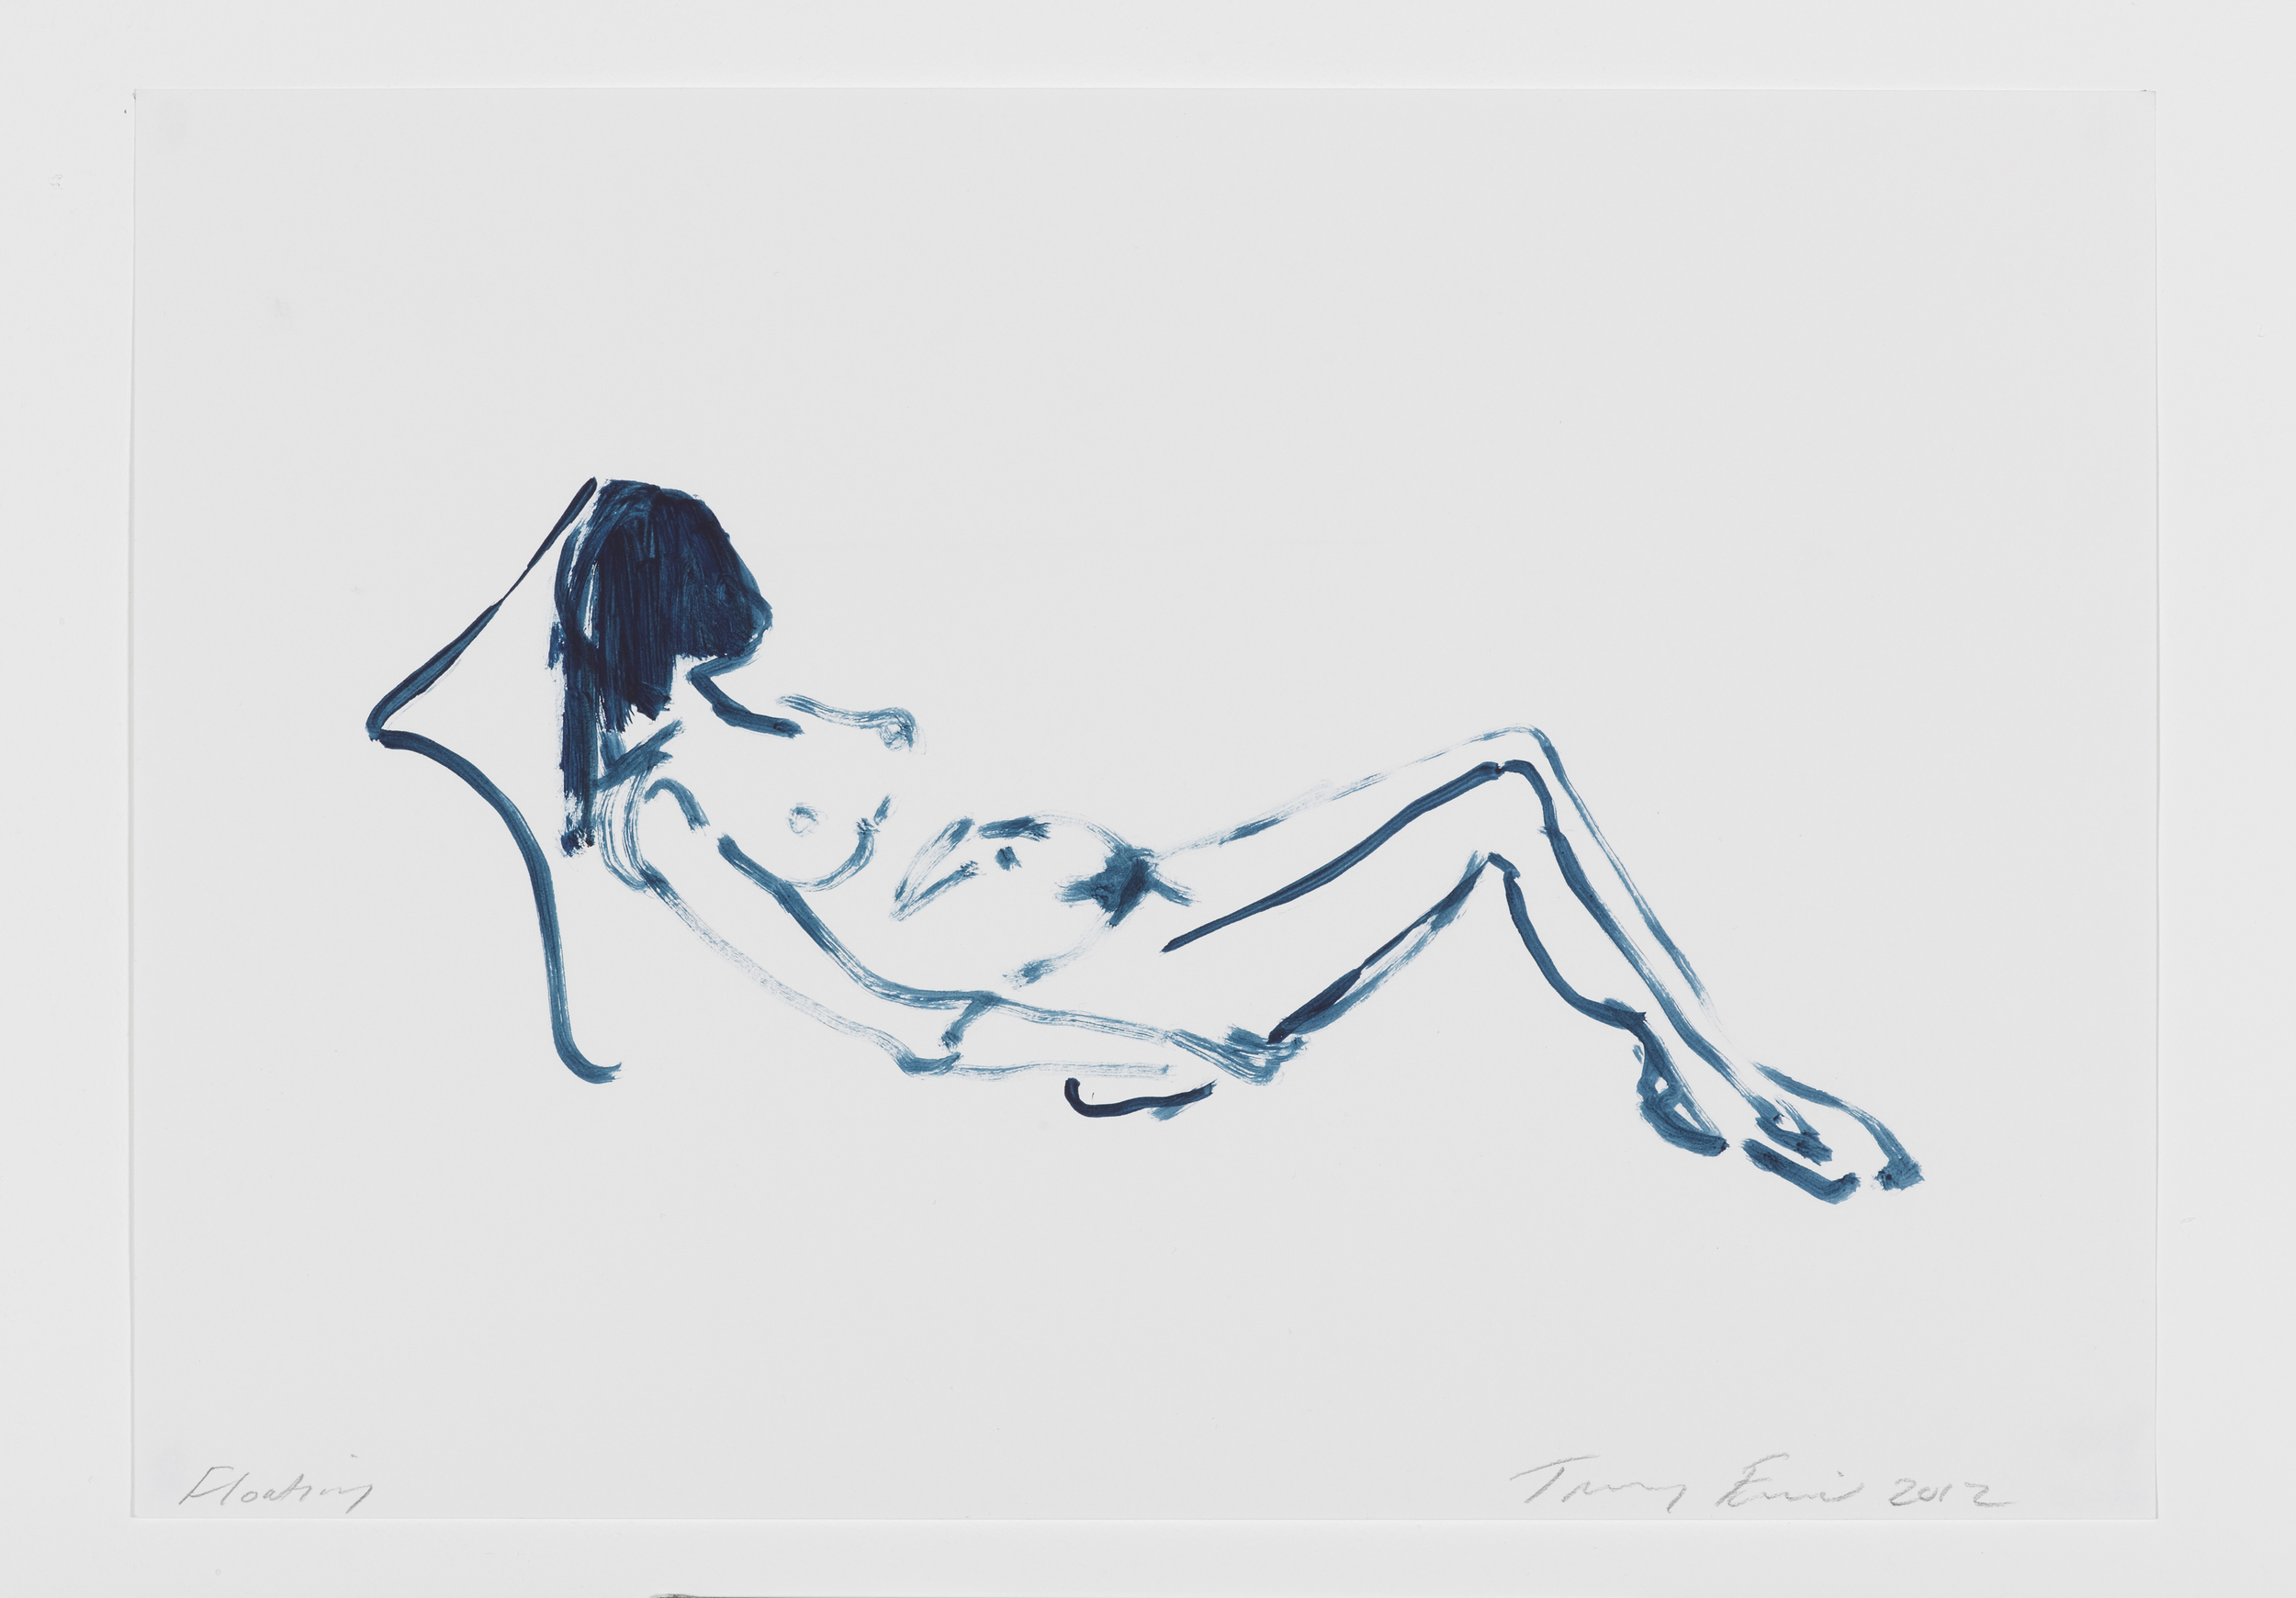 Tracey Emin, Floating, 2012